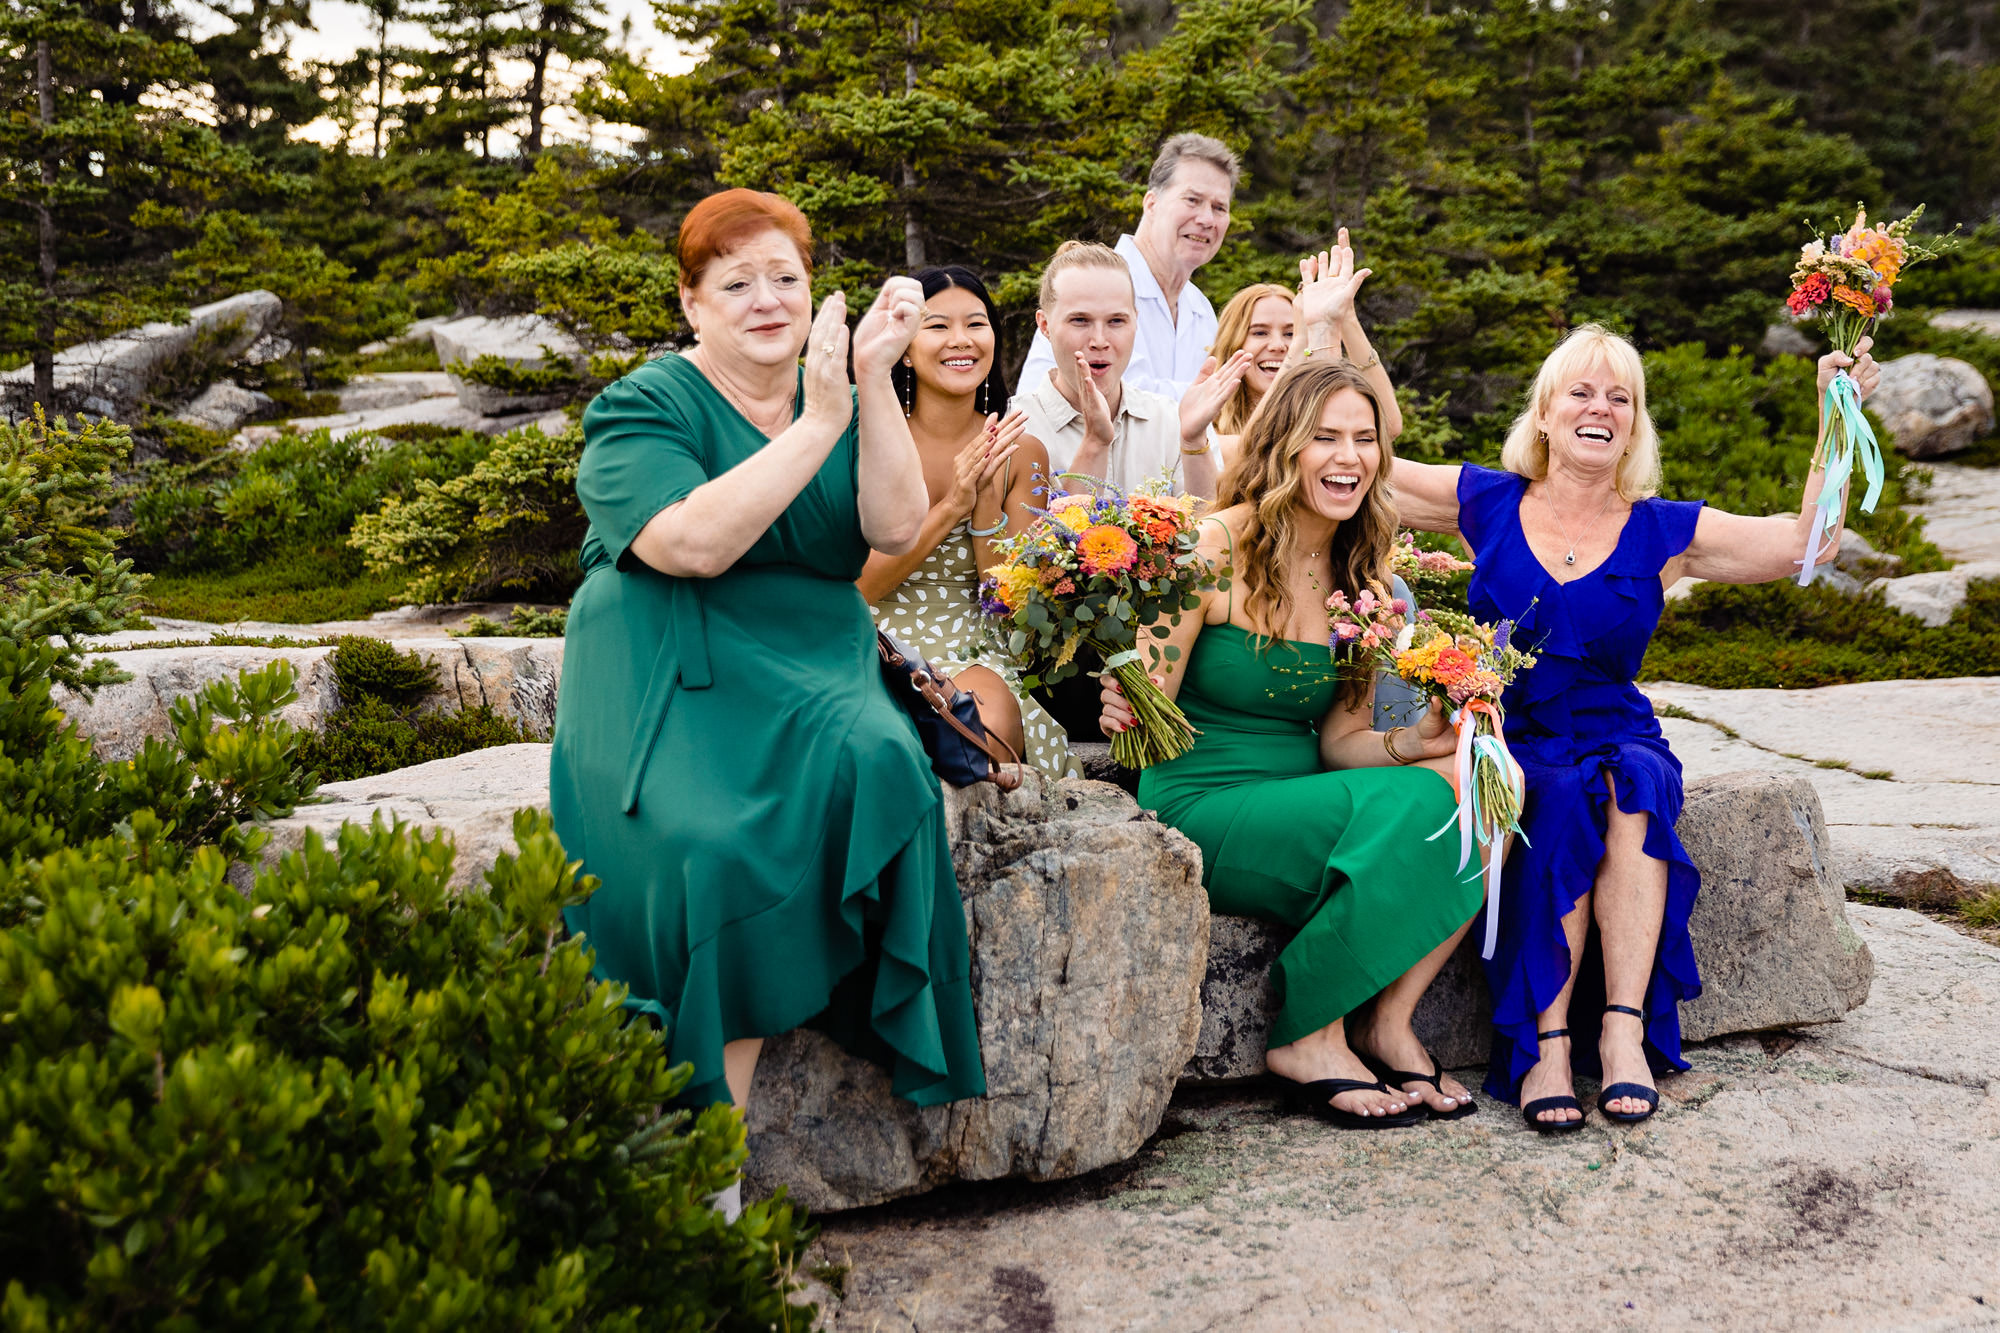 A Schoodic Point elopement ceremony at sunset